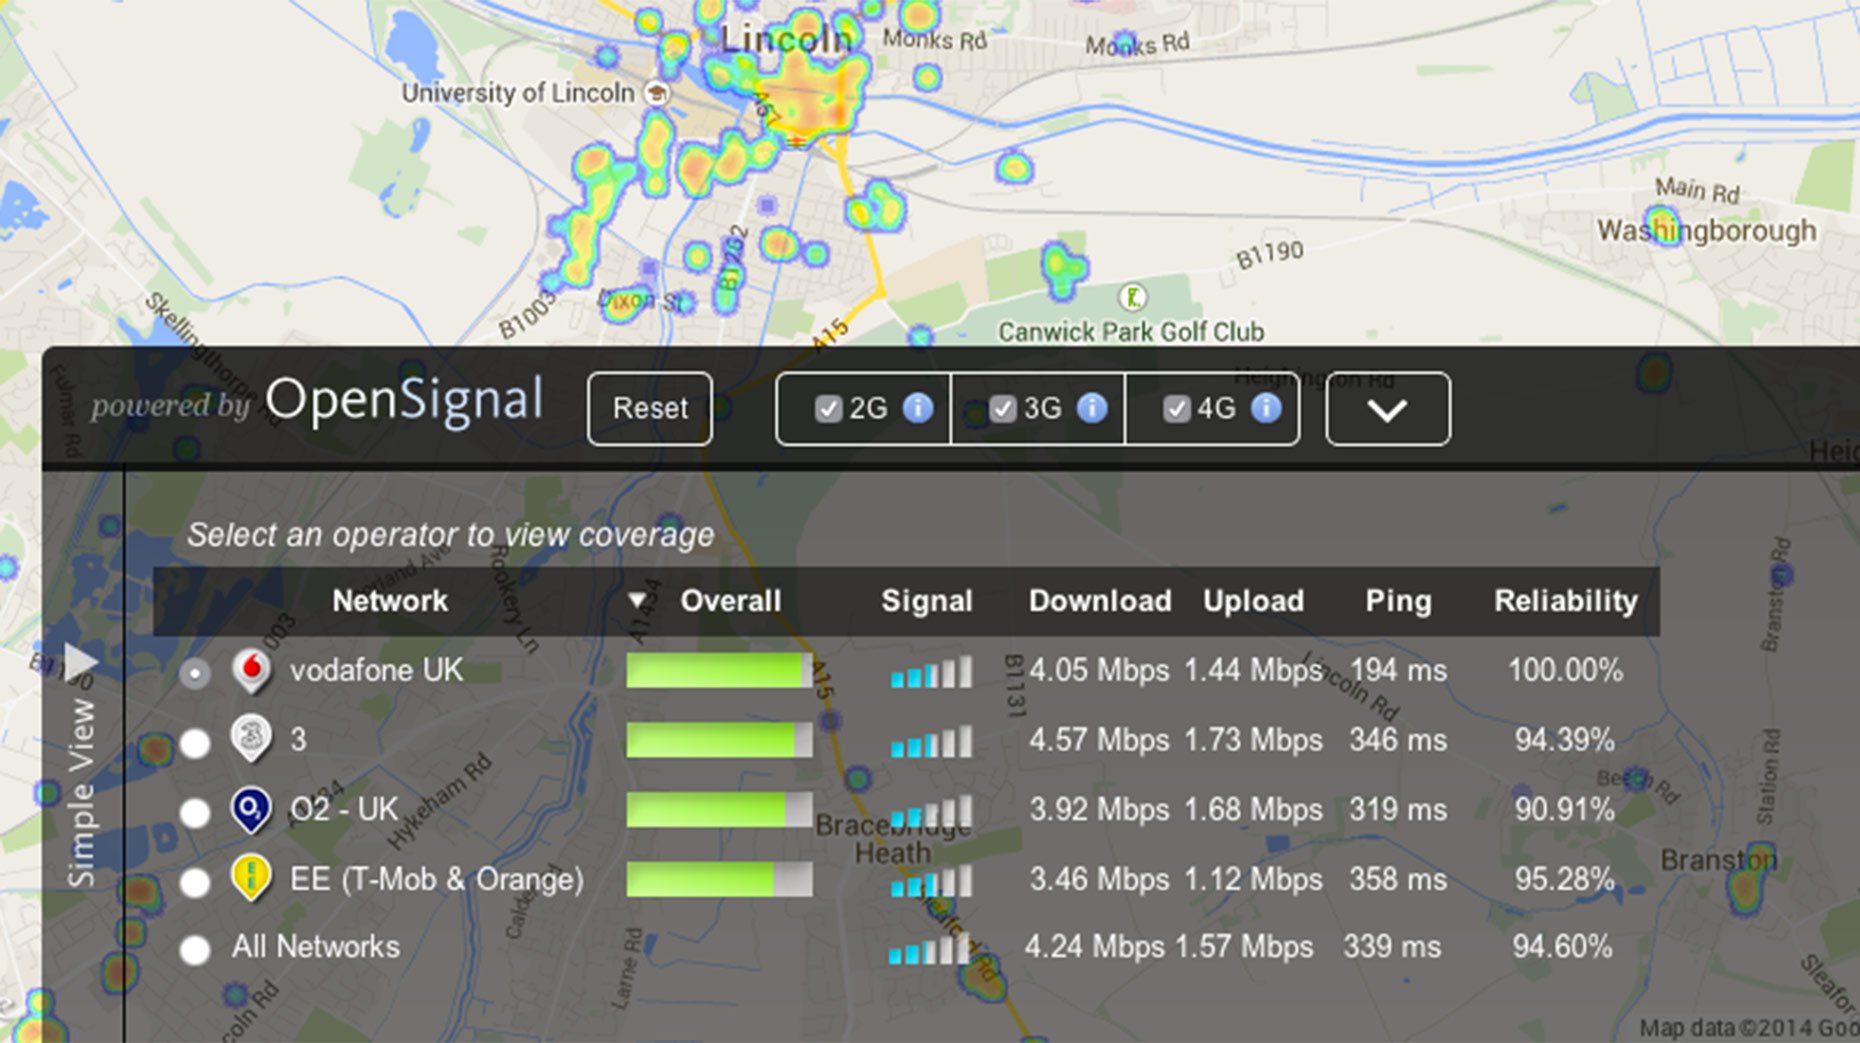 Advanced settings use crown-sourced data to determine the best coverage areas. 